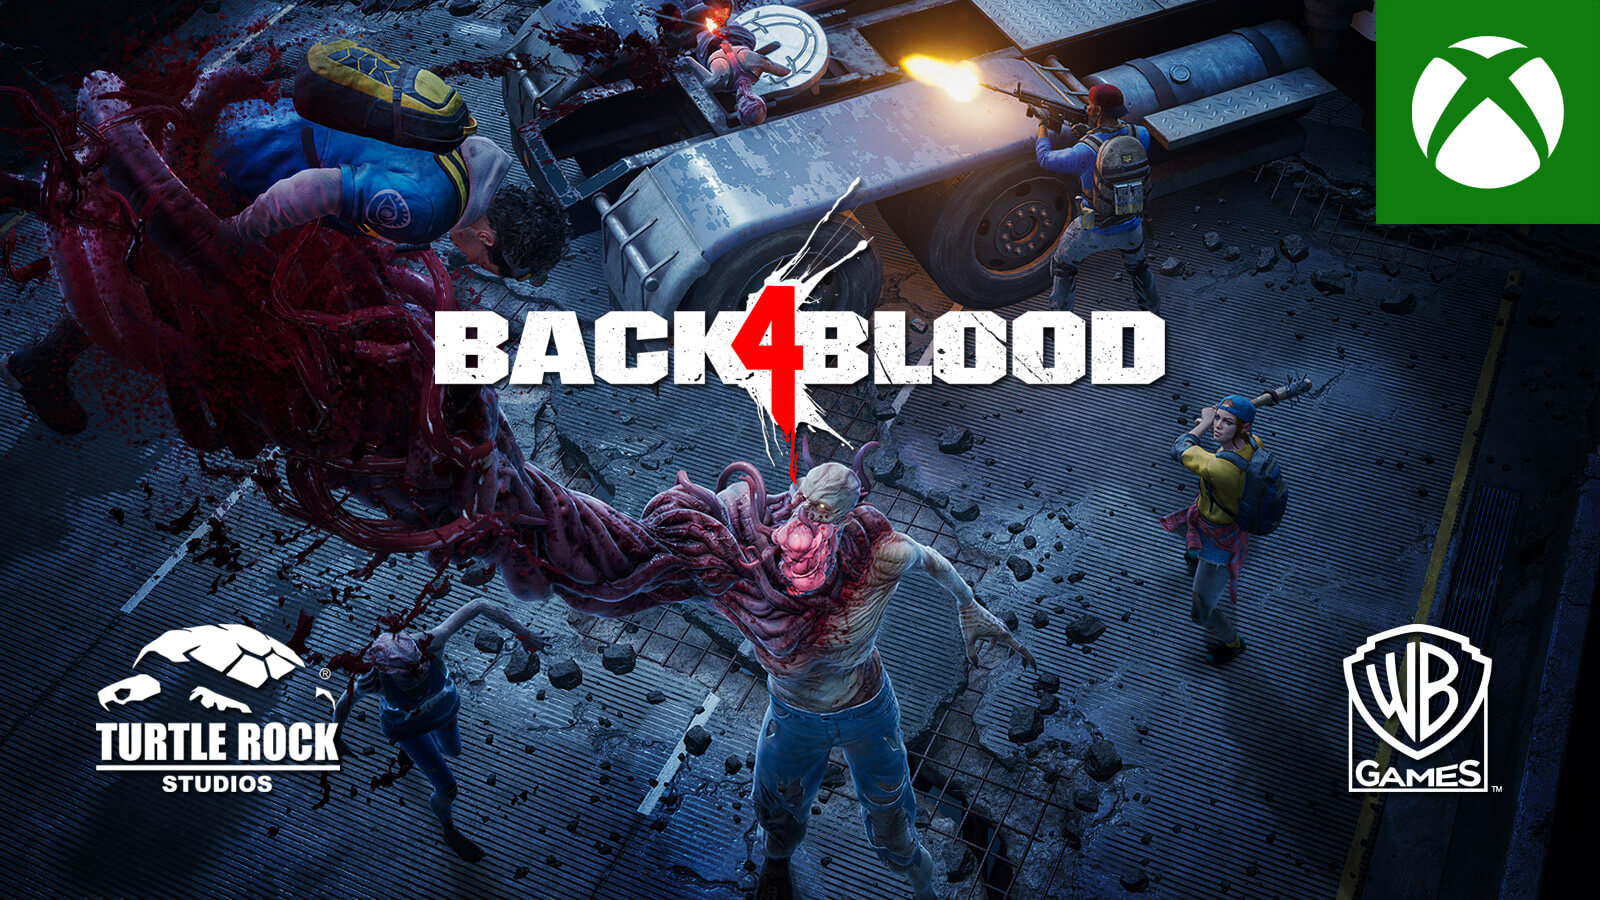 Back 4 Blood Pvp Gameplay Revealed Coming To Xbox Game Pass On Launch Day